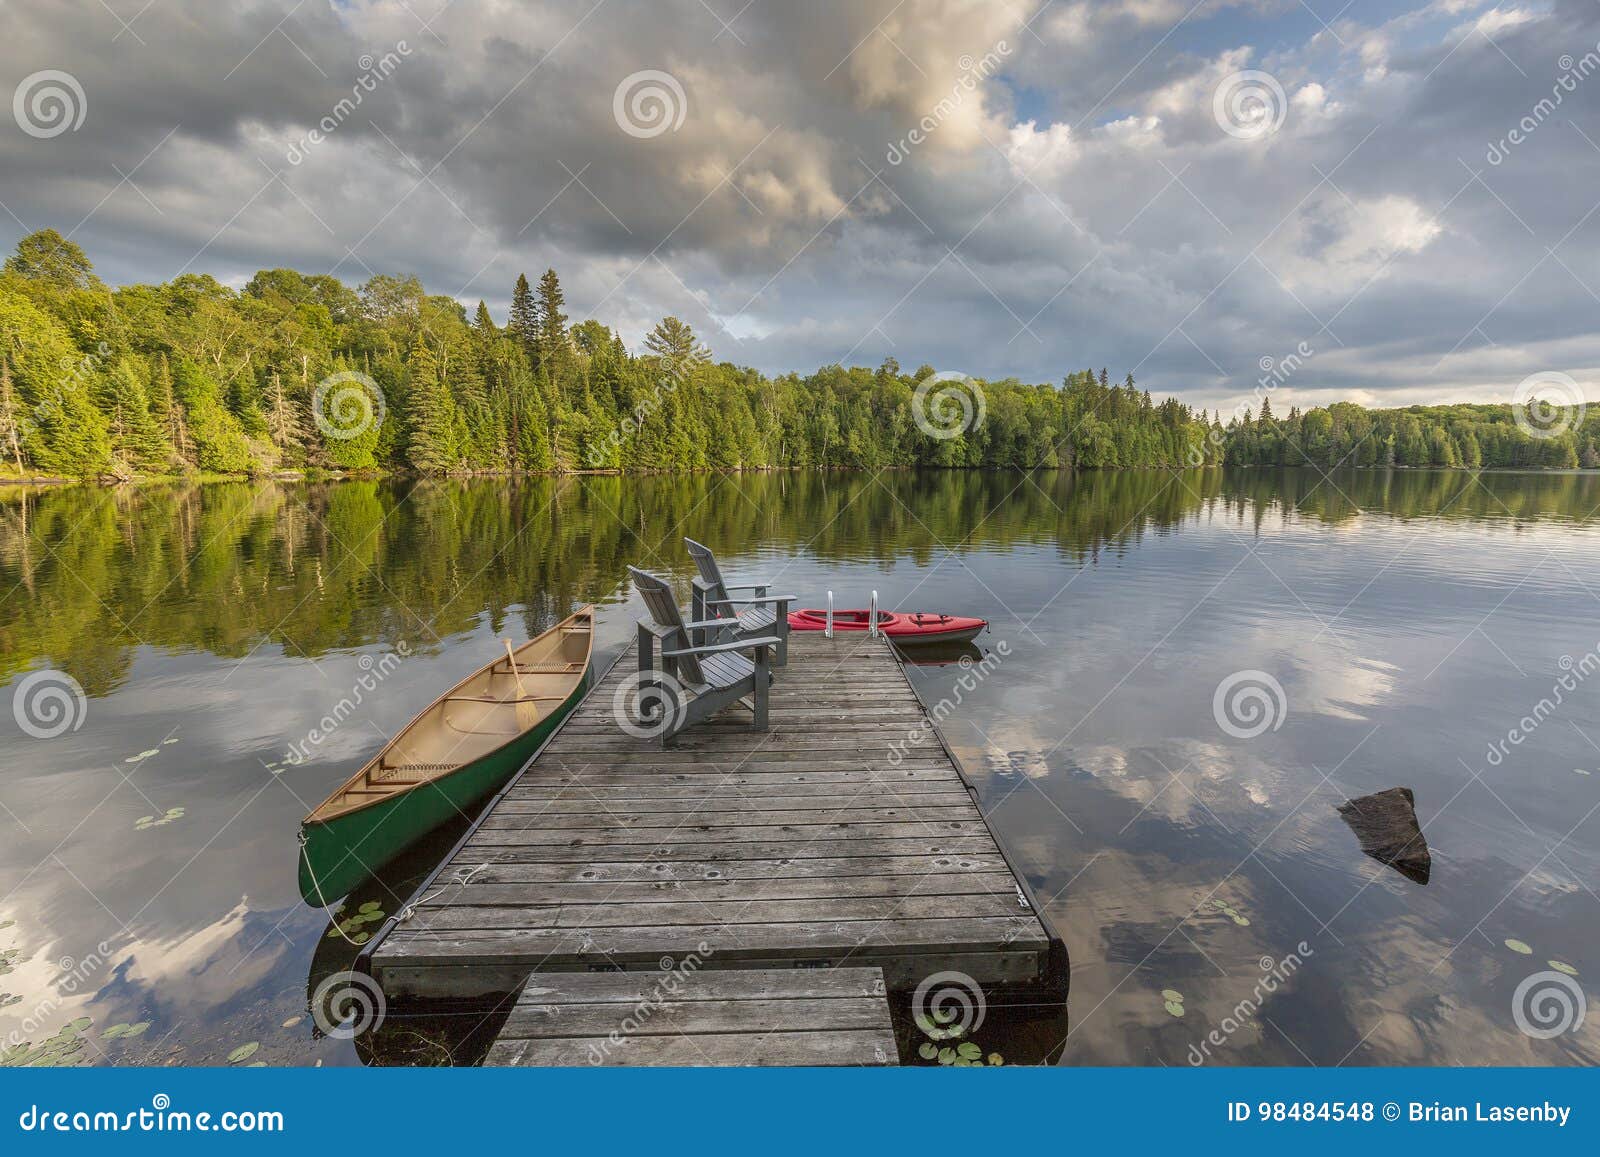 canoe and kayak tied to a dock on a lake in ontario canada